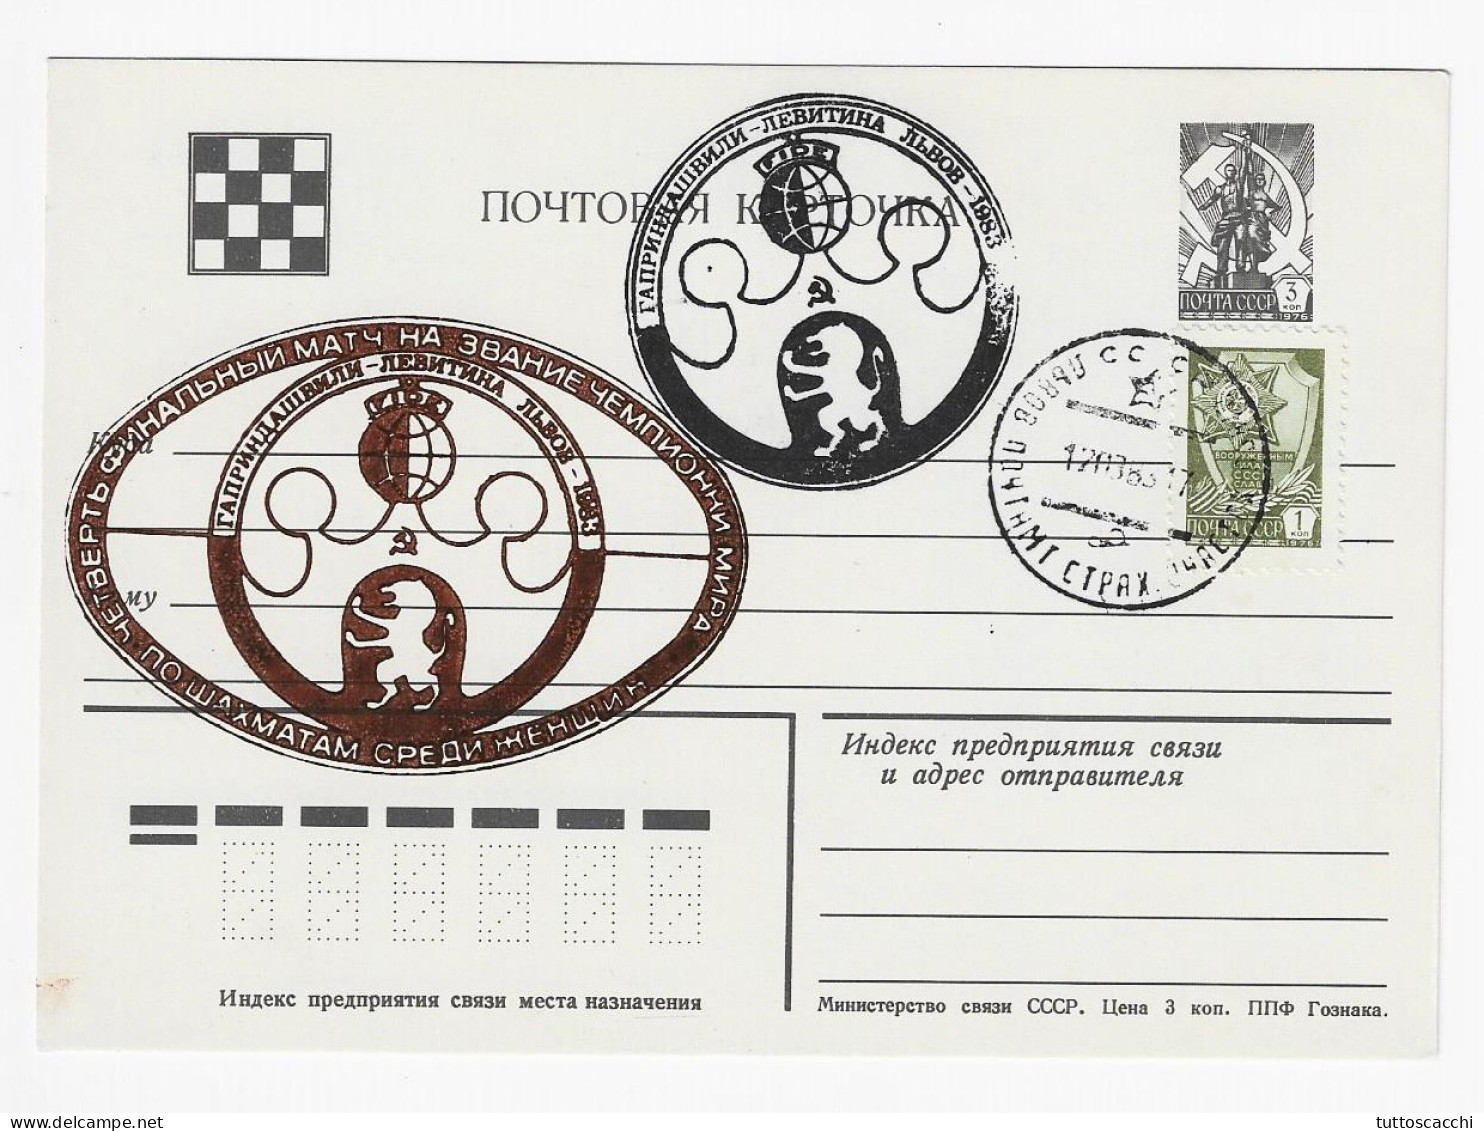 CHESS USSR 1983, Lvov - BROWN Oval Cancel On Chess For Correspondence Card - Chess